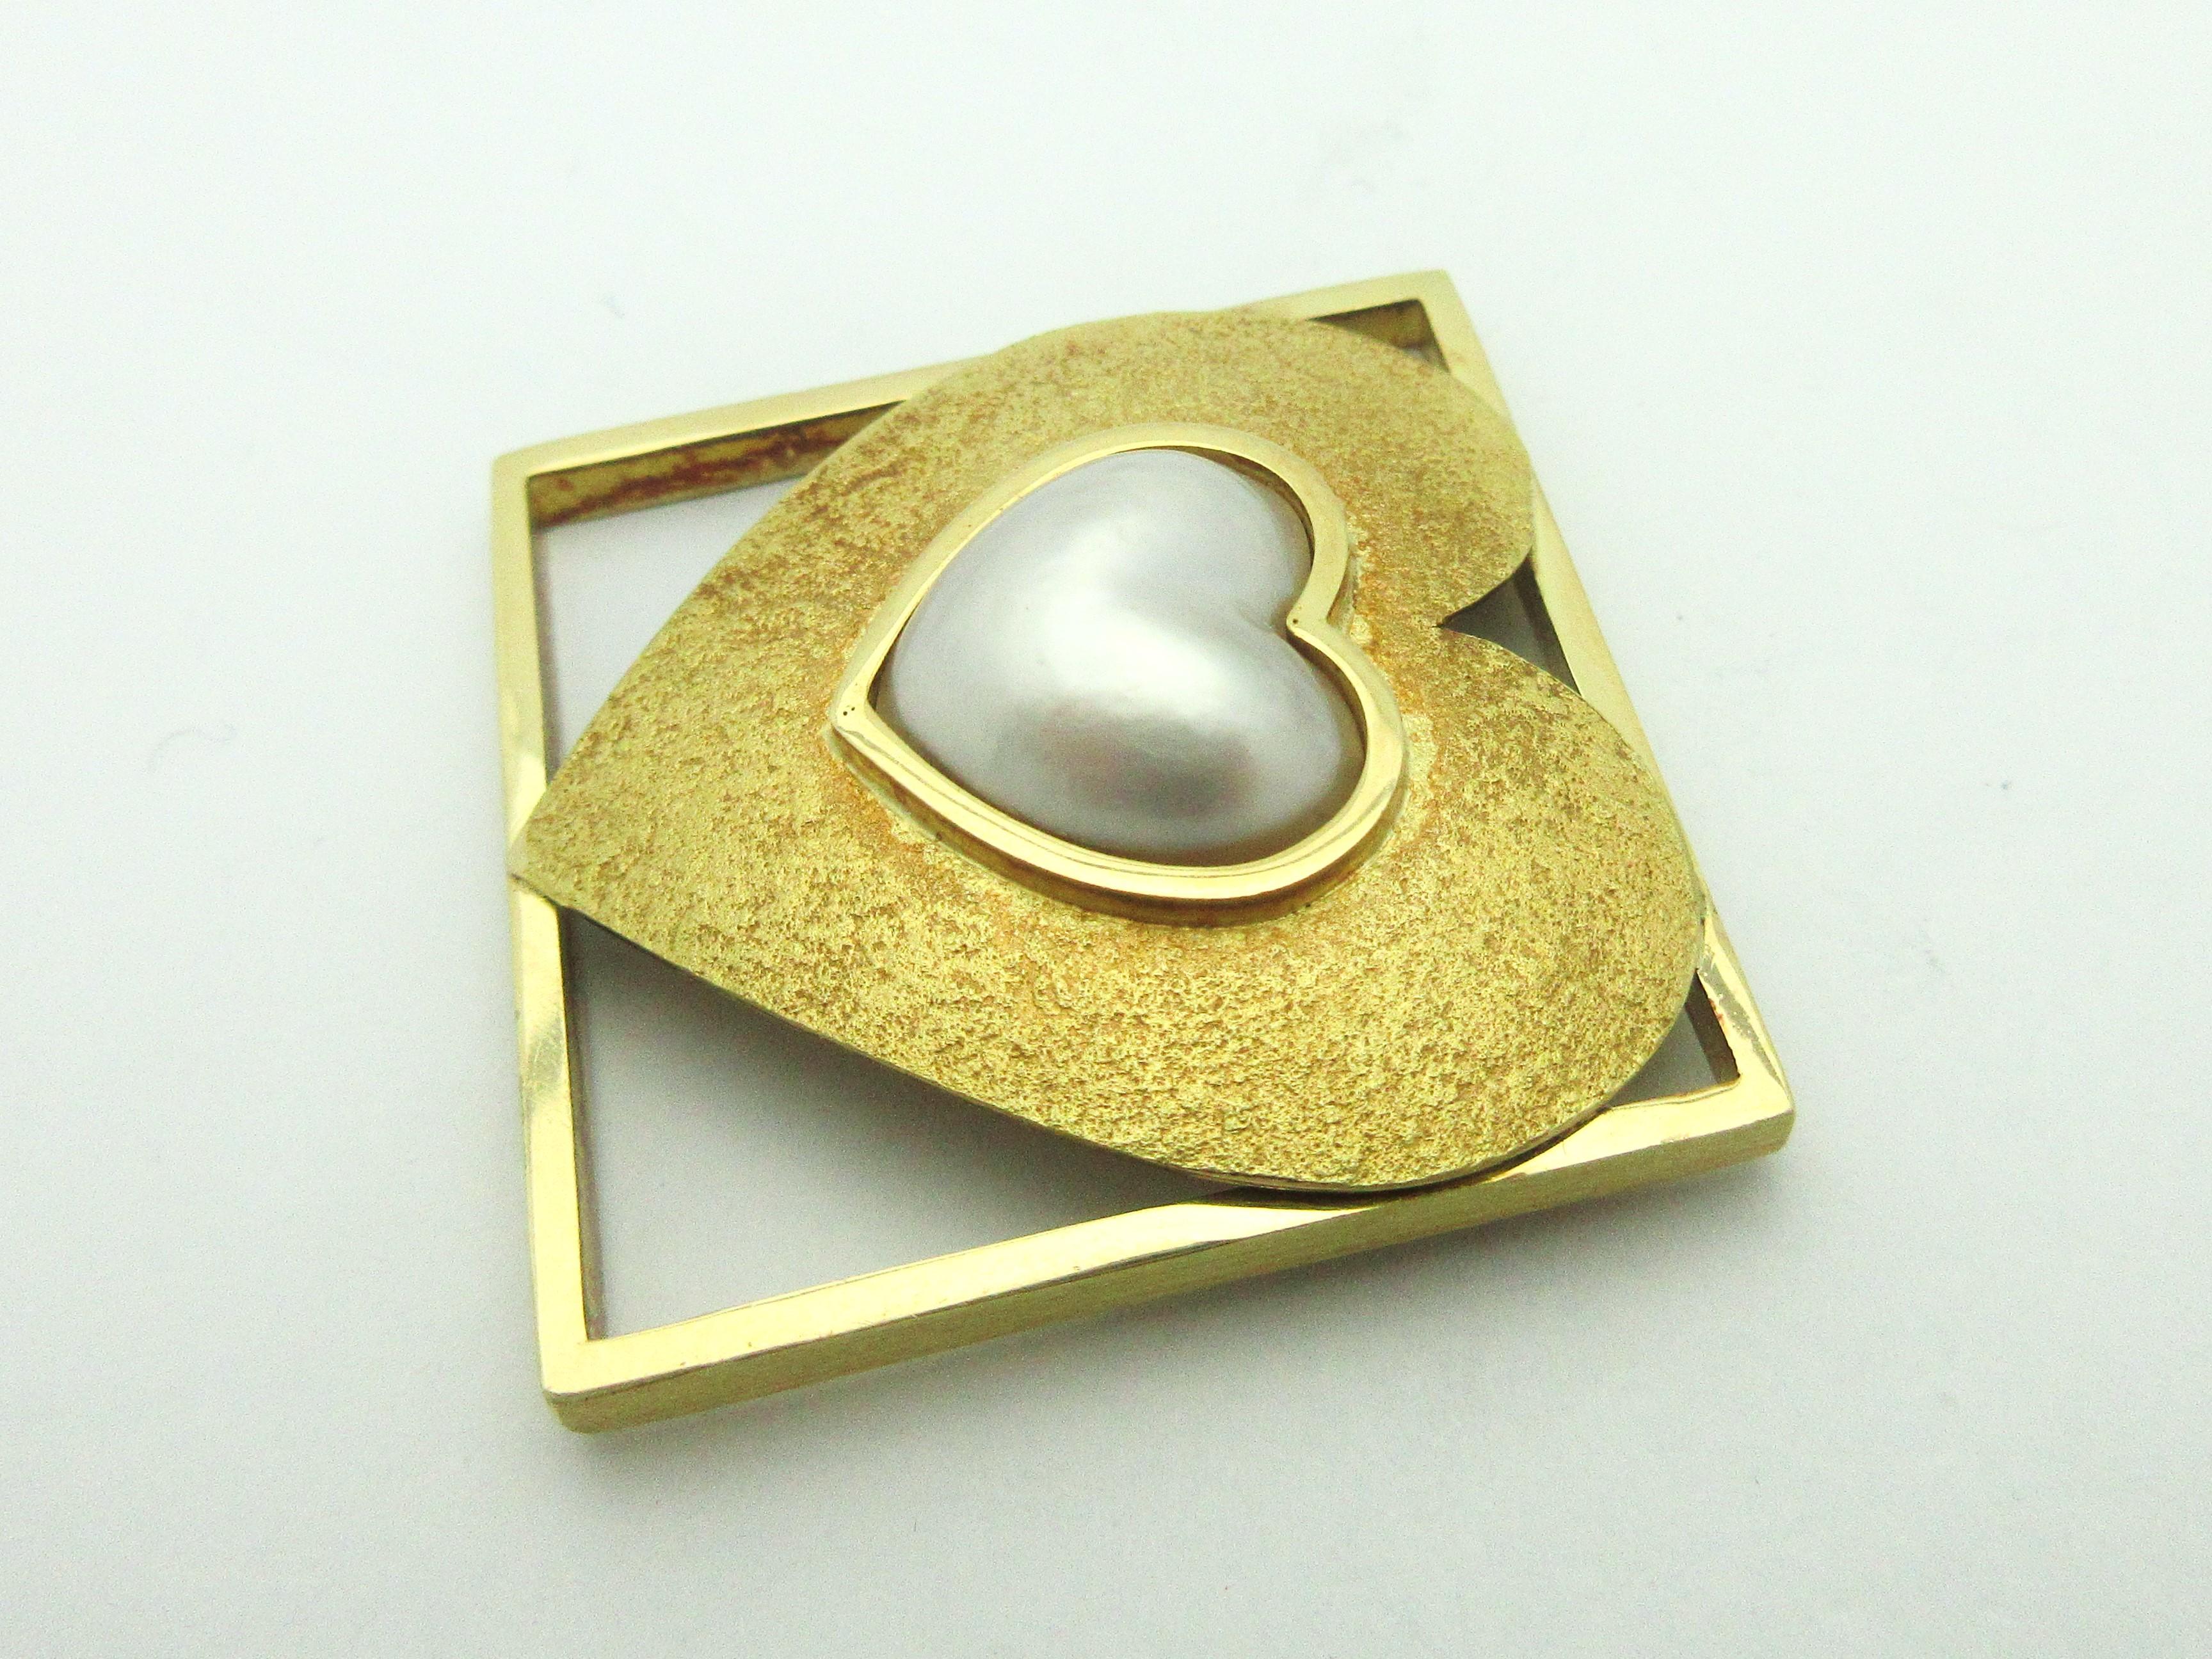 We are thrilled to offer this highly collectible Pat Flynn heart pin!  

The pin is made from 18k yellow gold, featuring a textured heart set with a heart-shaped mabe pearl in a polished square frame.  The pin measures 1.25